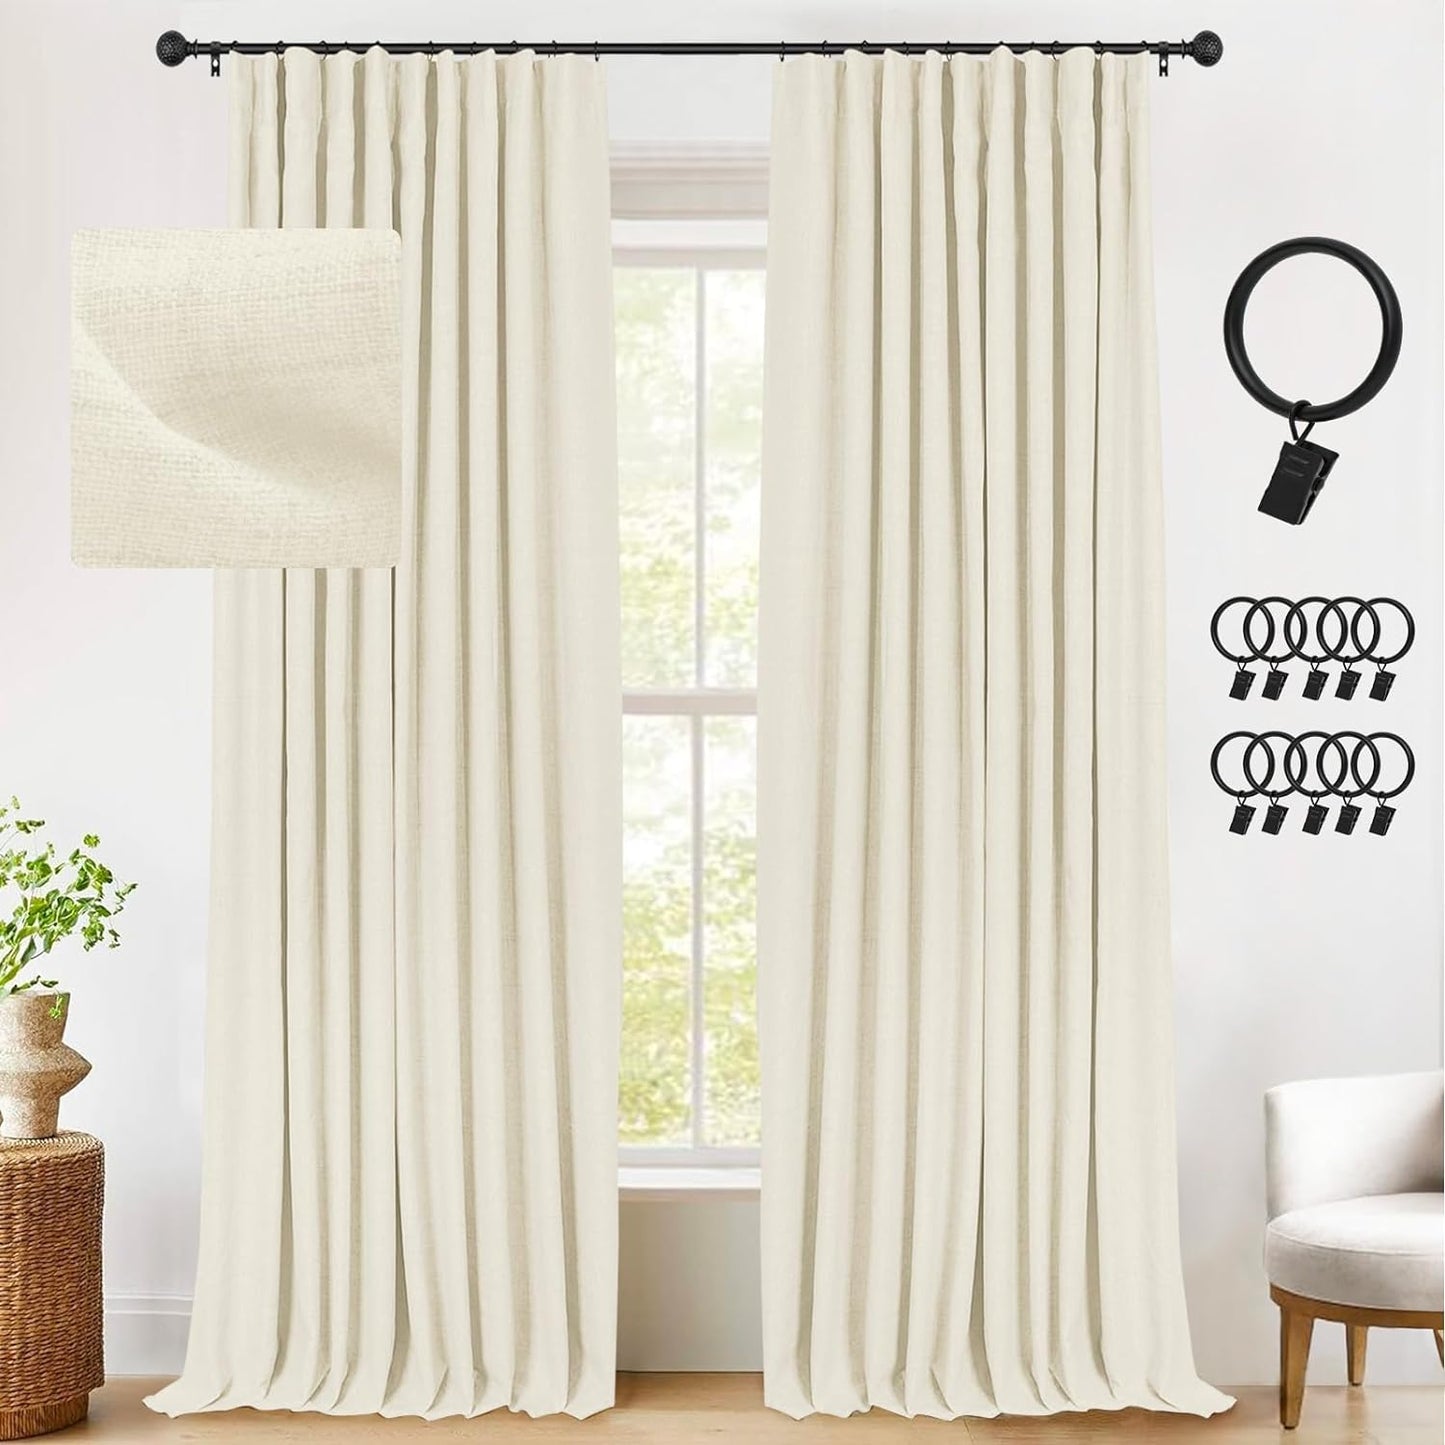 INOVADAY Linen Blackout Curtains 96 Inches Long, Thermal Insulated Black Out Curtains & Drapes for Living Room Bedroom (W50 X L96 1 Panels, Beige)  INOVADAY Cream Cheese 50"W X 96"L 